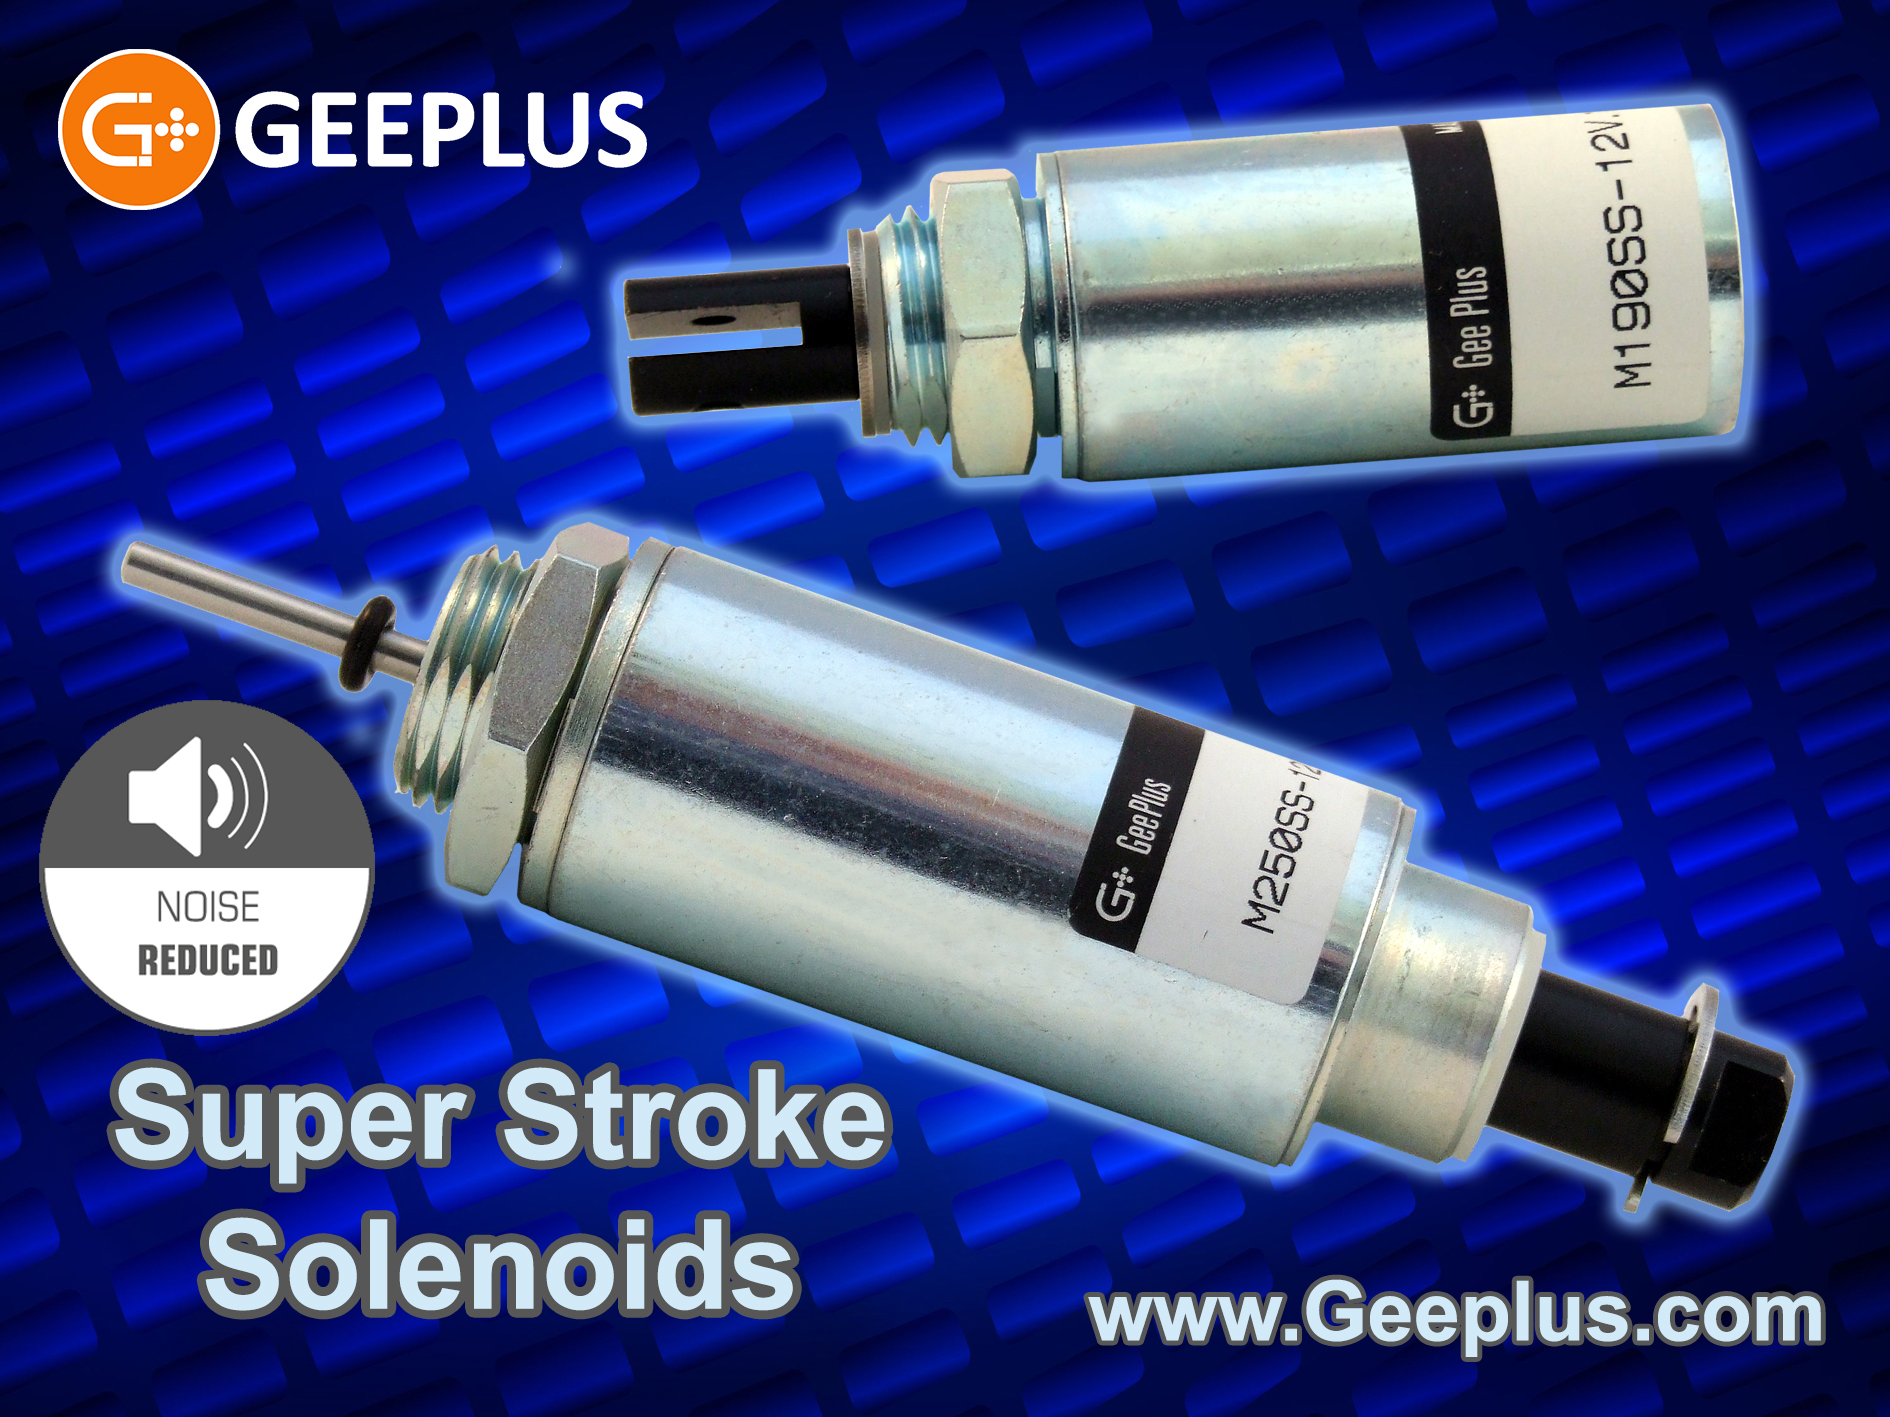 Super Stroke Solenoid from Geeplus Reduced noise